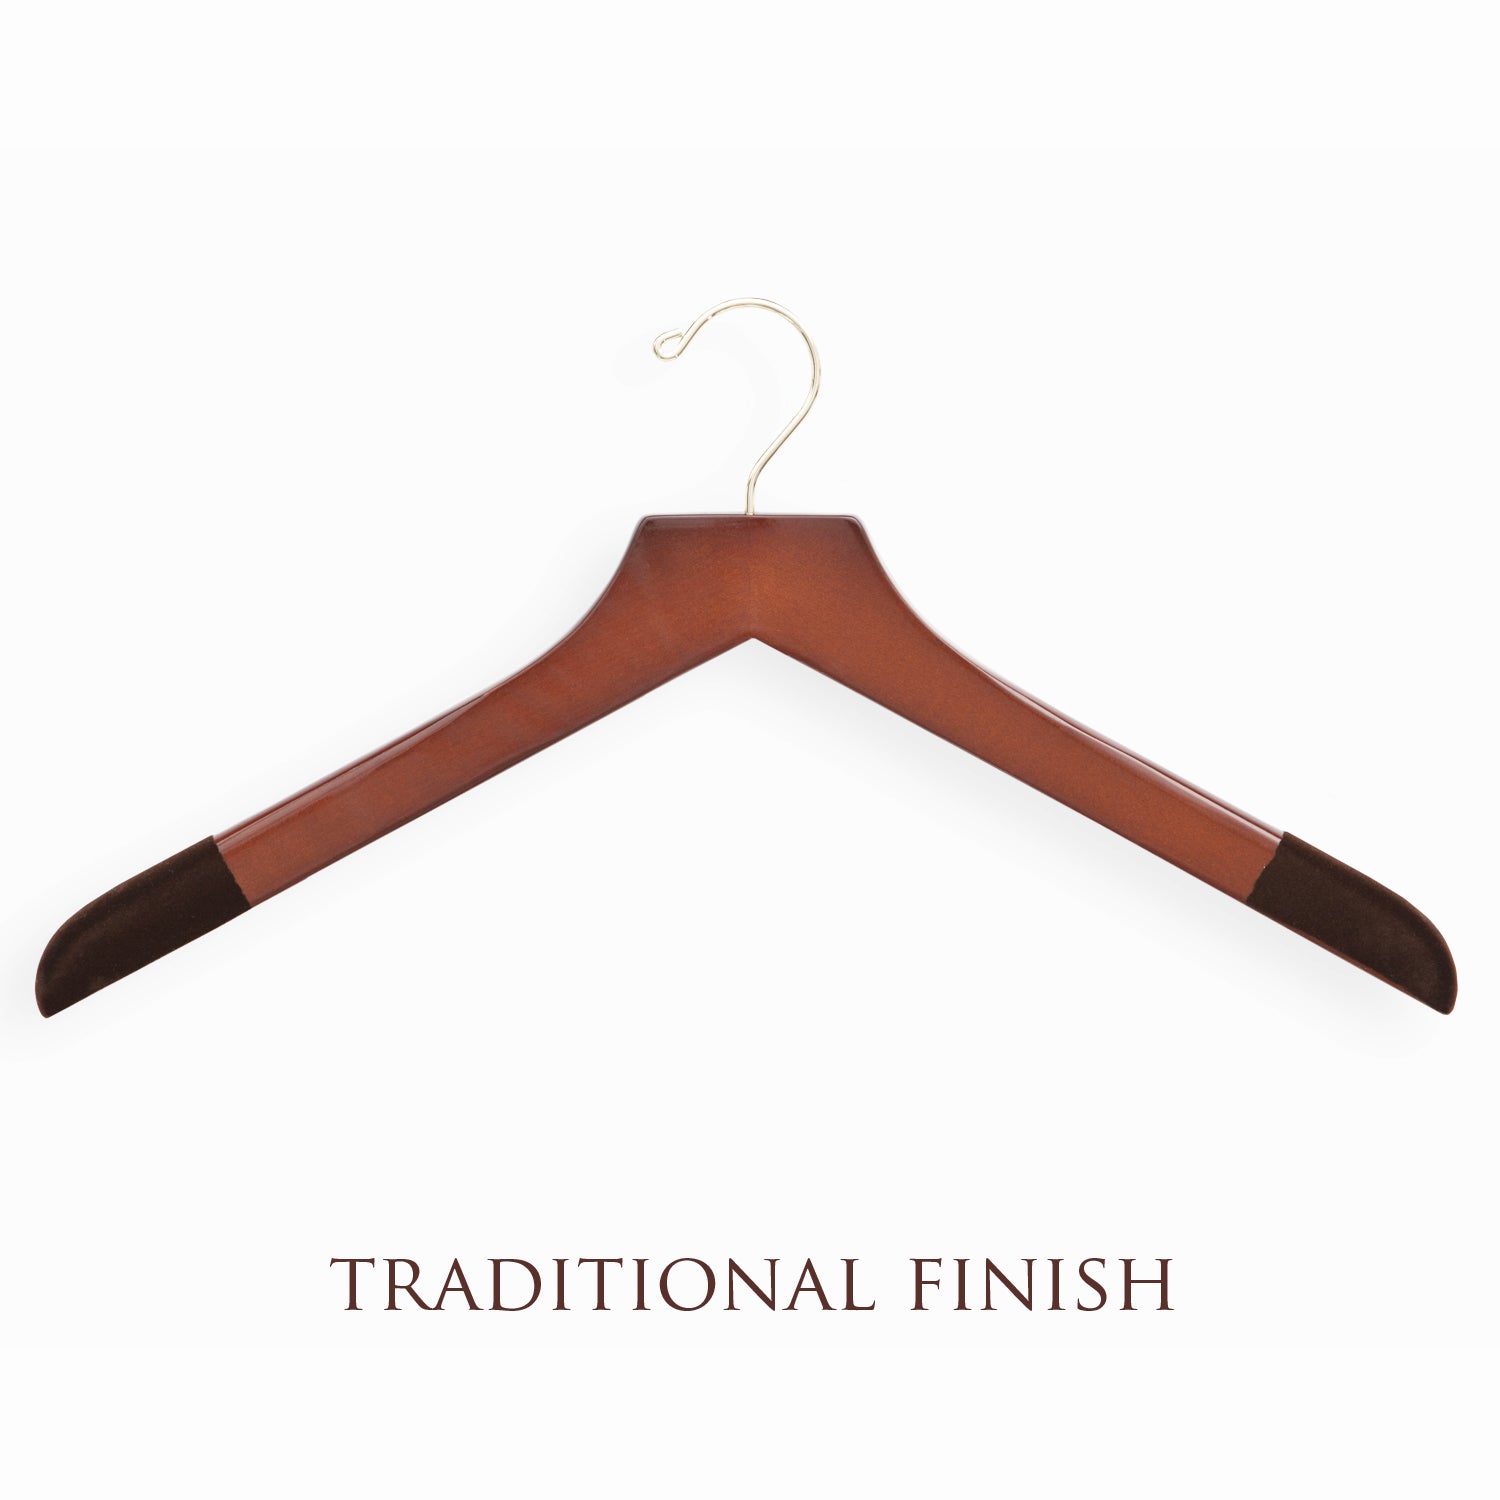 An Extra-Large 21" Luxury Wooden Sweater and Polo Hanger from KirbyAllison.com with a traditional finish.